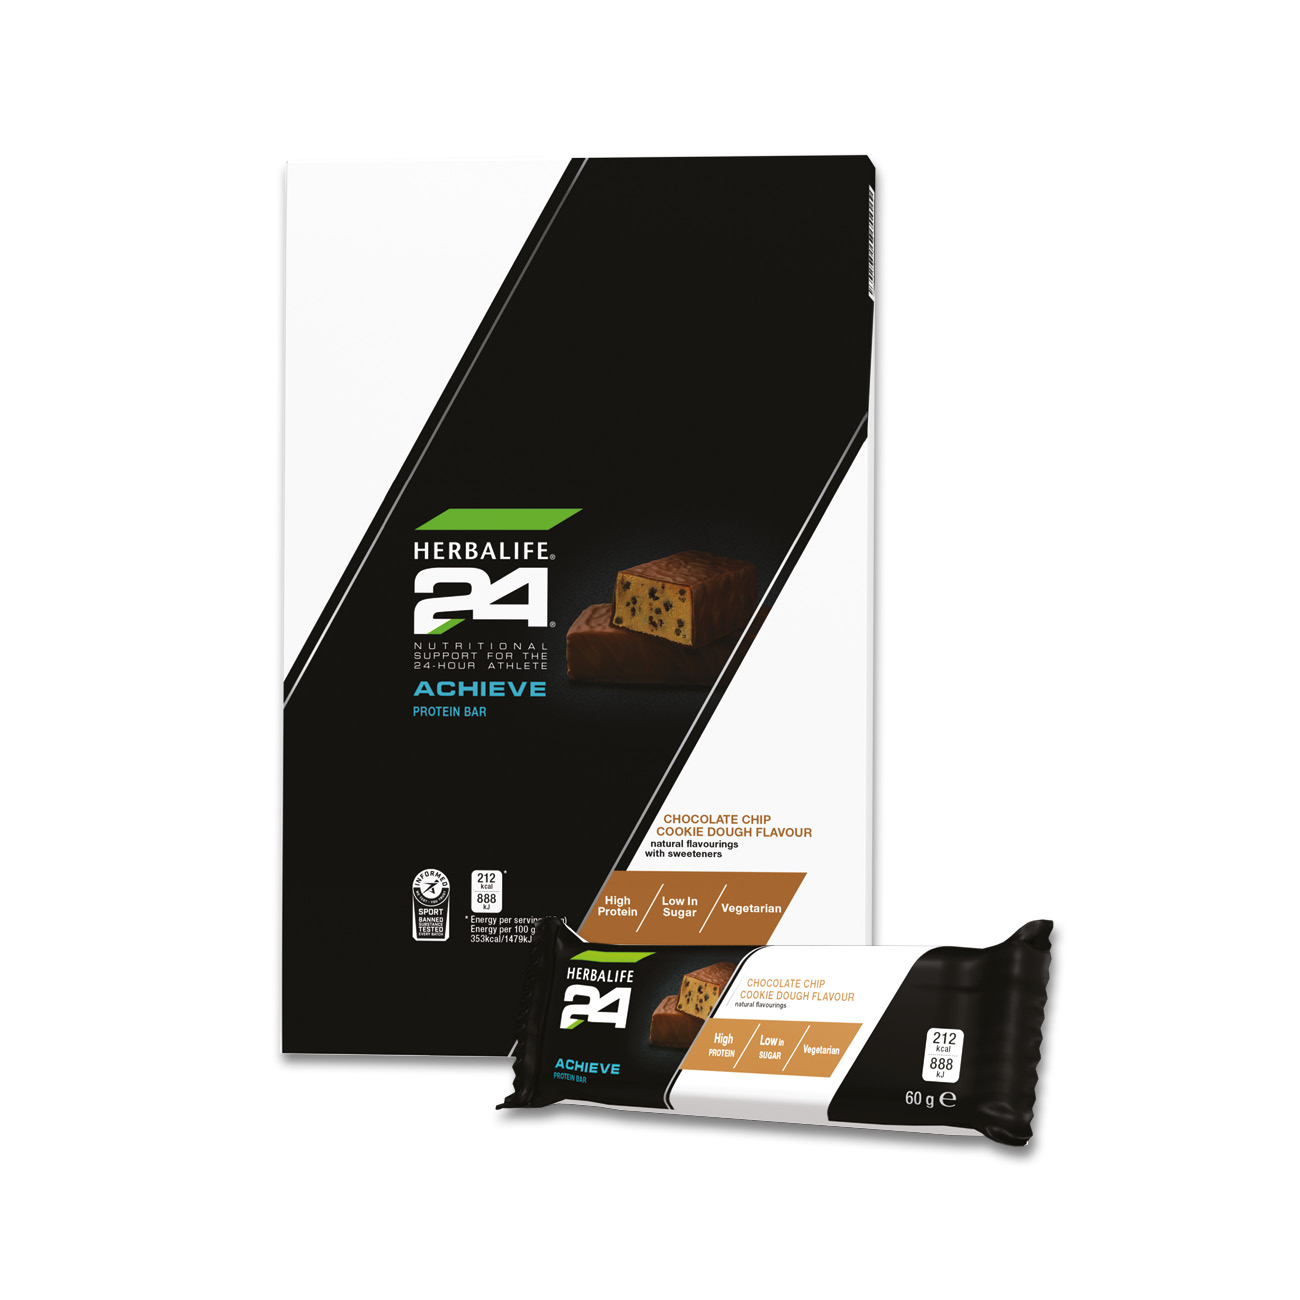 A convenient post-workout treat that contains 21g of protein per bar, which contributes towards the growth and maintenance of muscle mass, are low in sugar and are suitable for vegetarians.